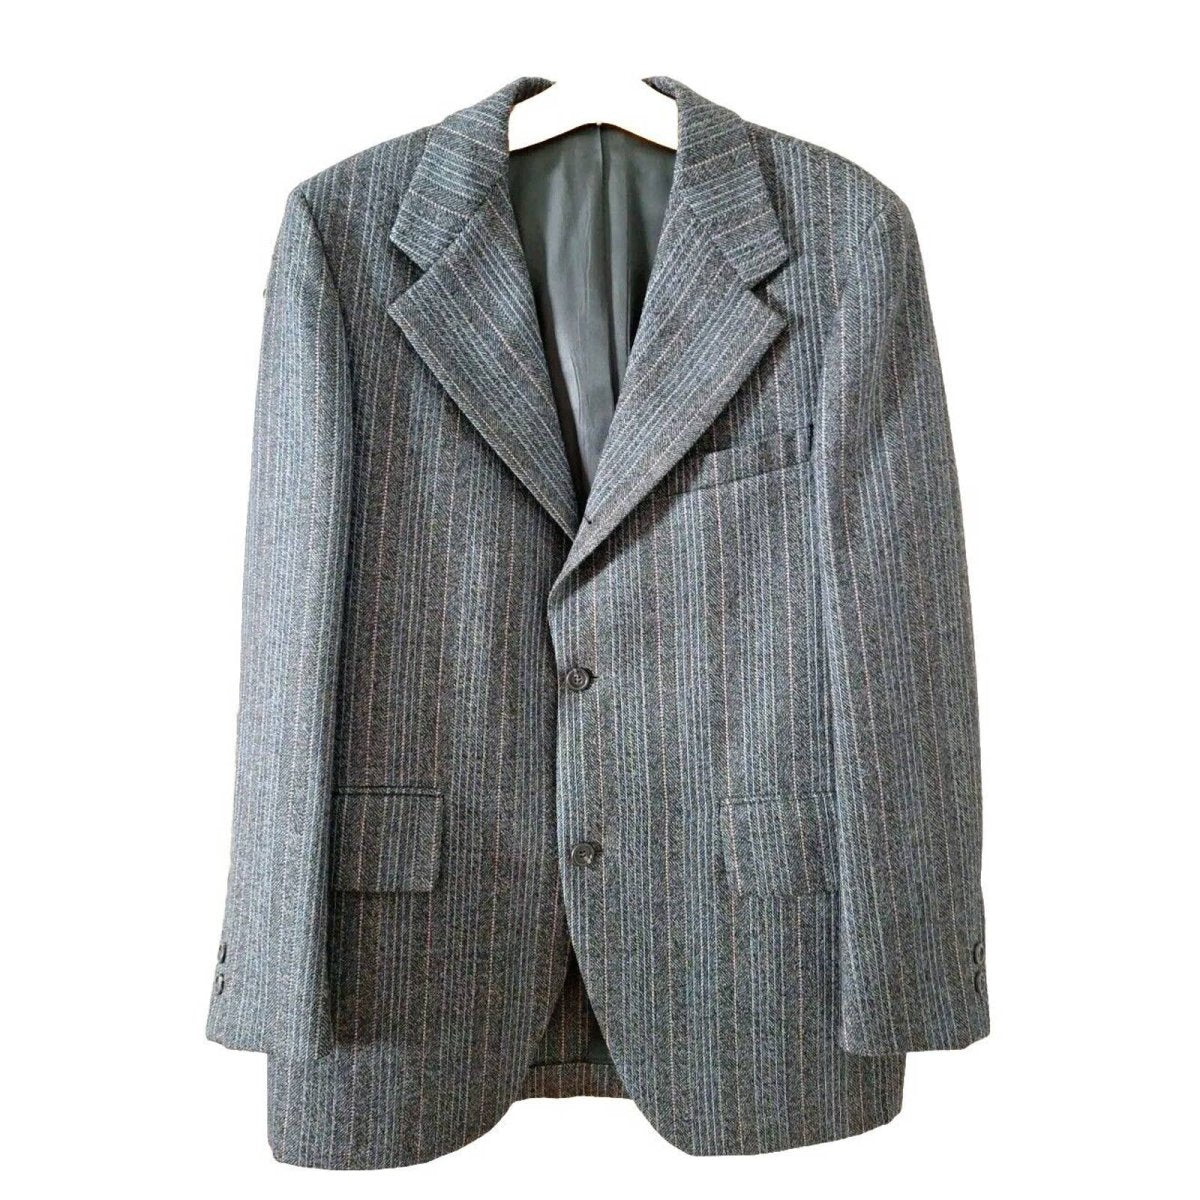 Vintage 60s/70s Striped Wool 3 Button Sport Coat Men Size 40R - themallvintage The Mall Vintage